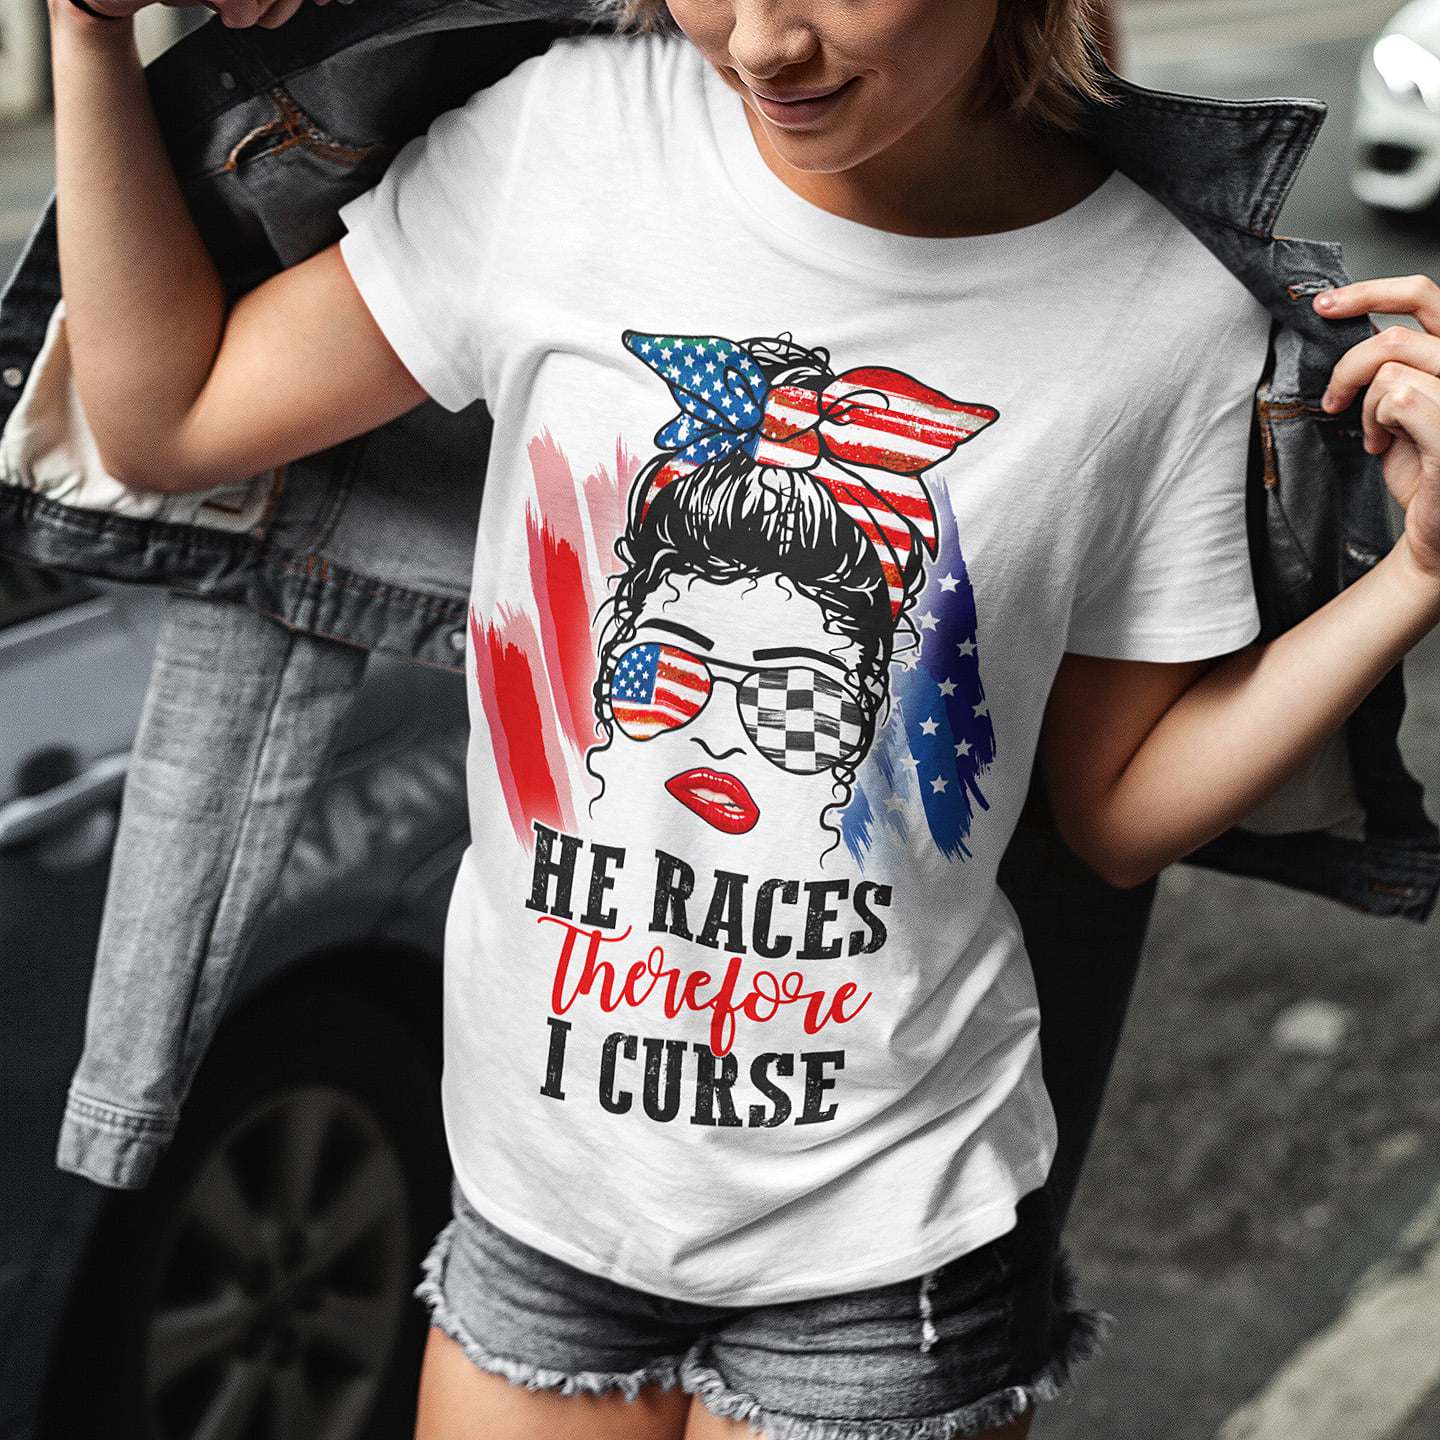 He races therefore I curse - Woman flag, American independence day